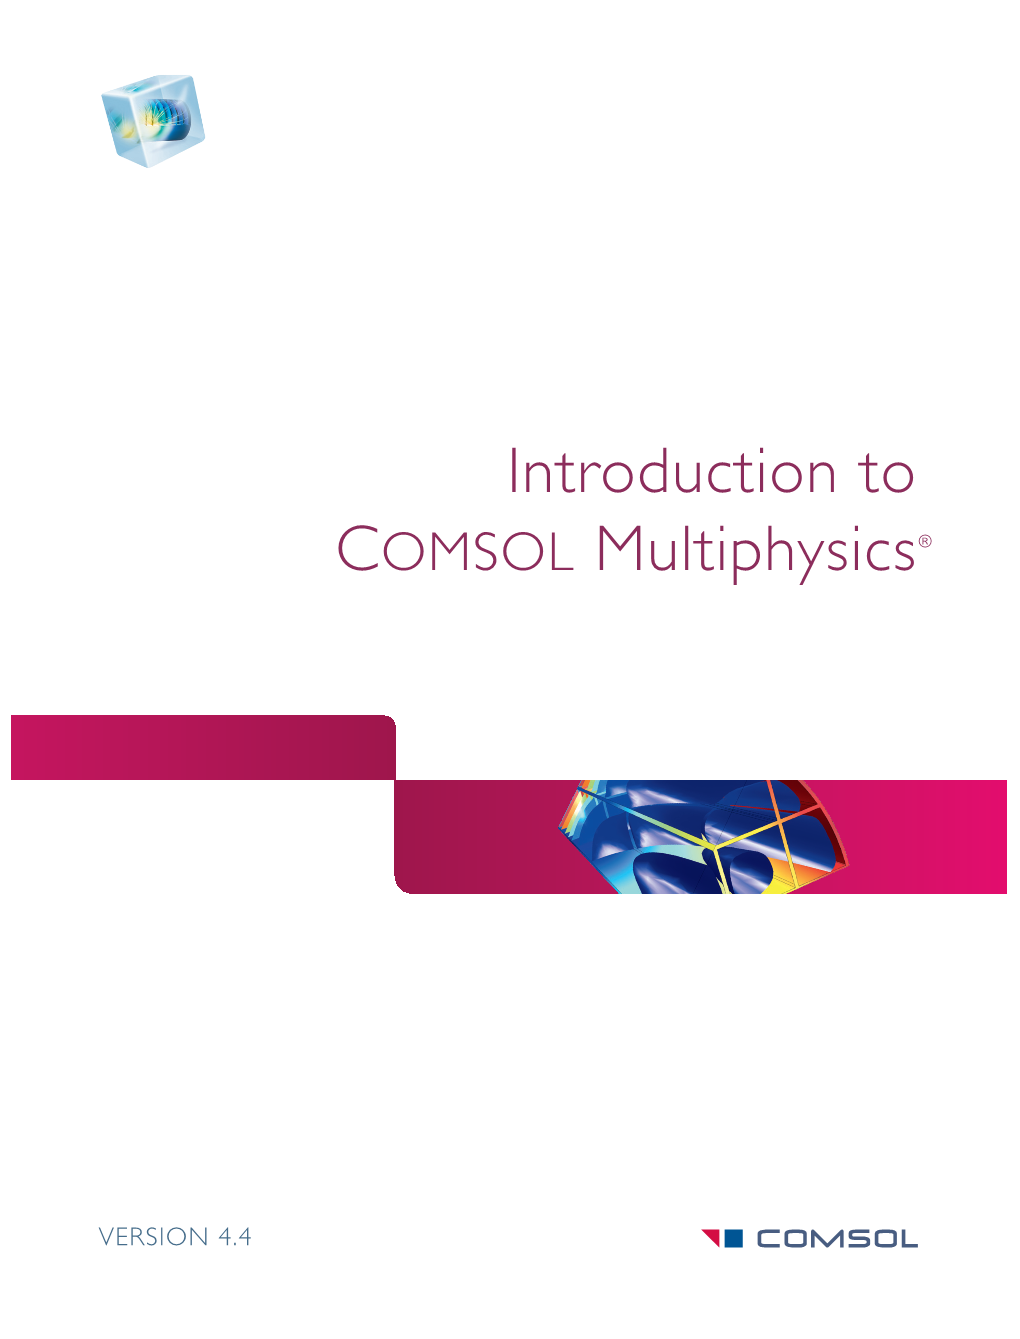 Introduction to Comsol Multiphysics®